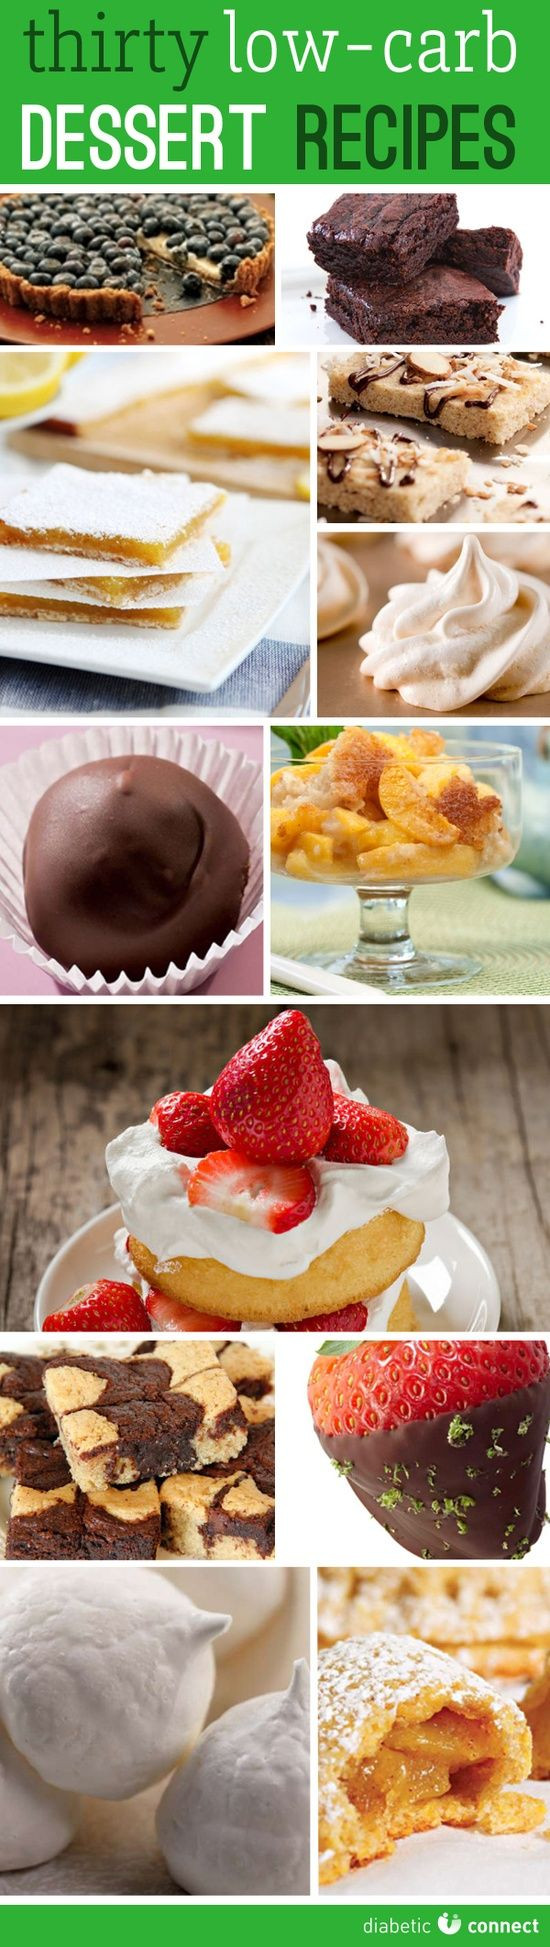 Healthy Low Carb Desserts
 32 best images about Diabetes Friendly Desserts on